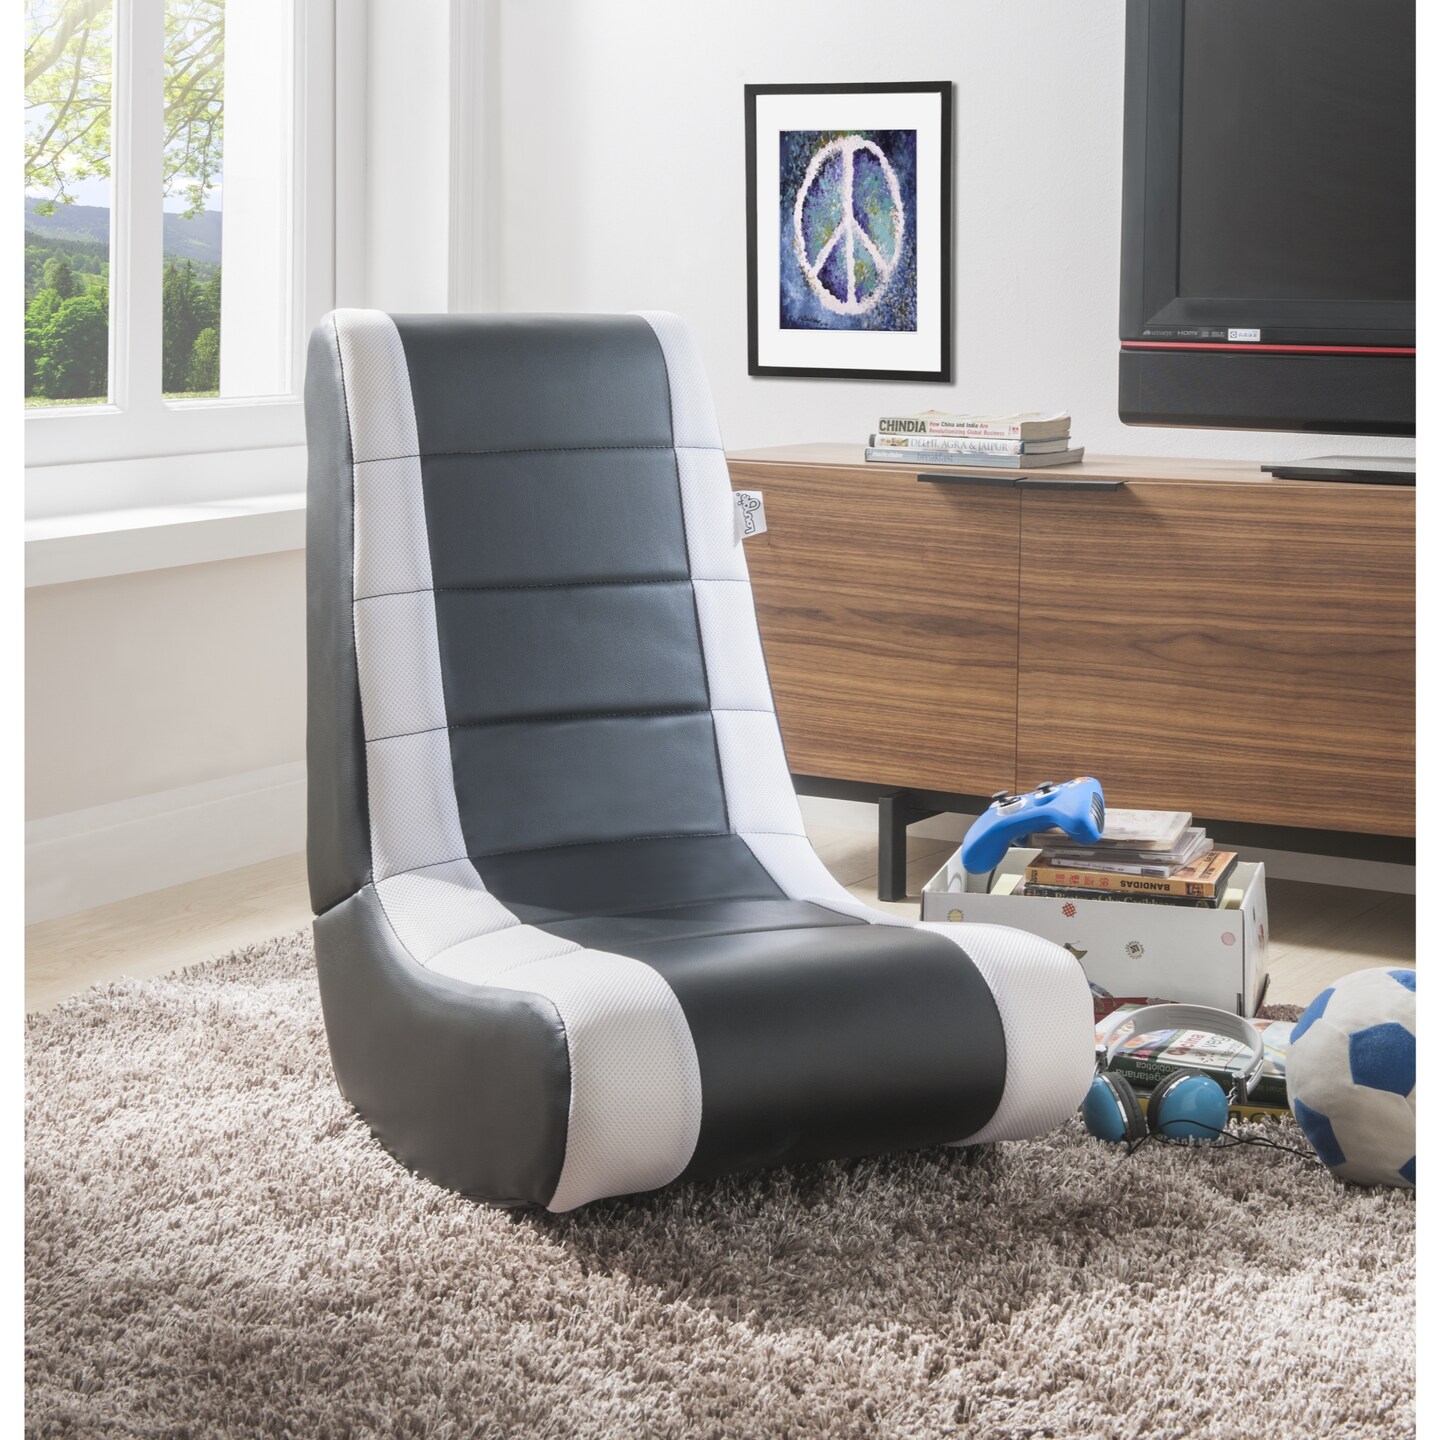 Rockme Video Gaming Rocker Chair For Kids, Teens, Adults, Boys Or Girls